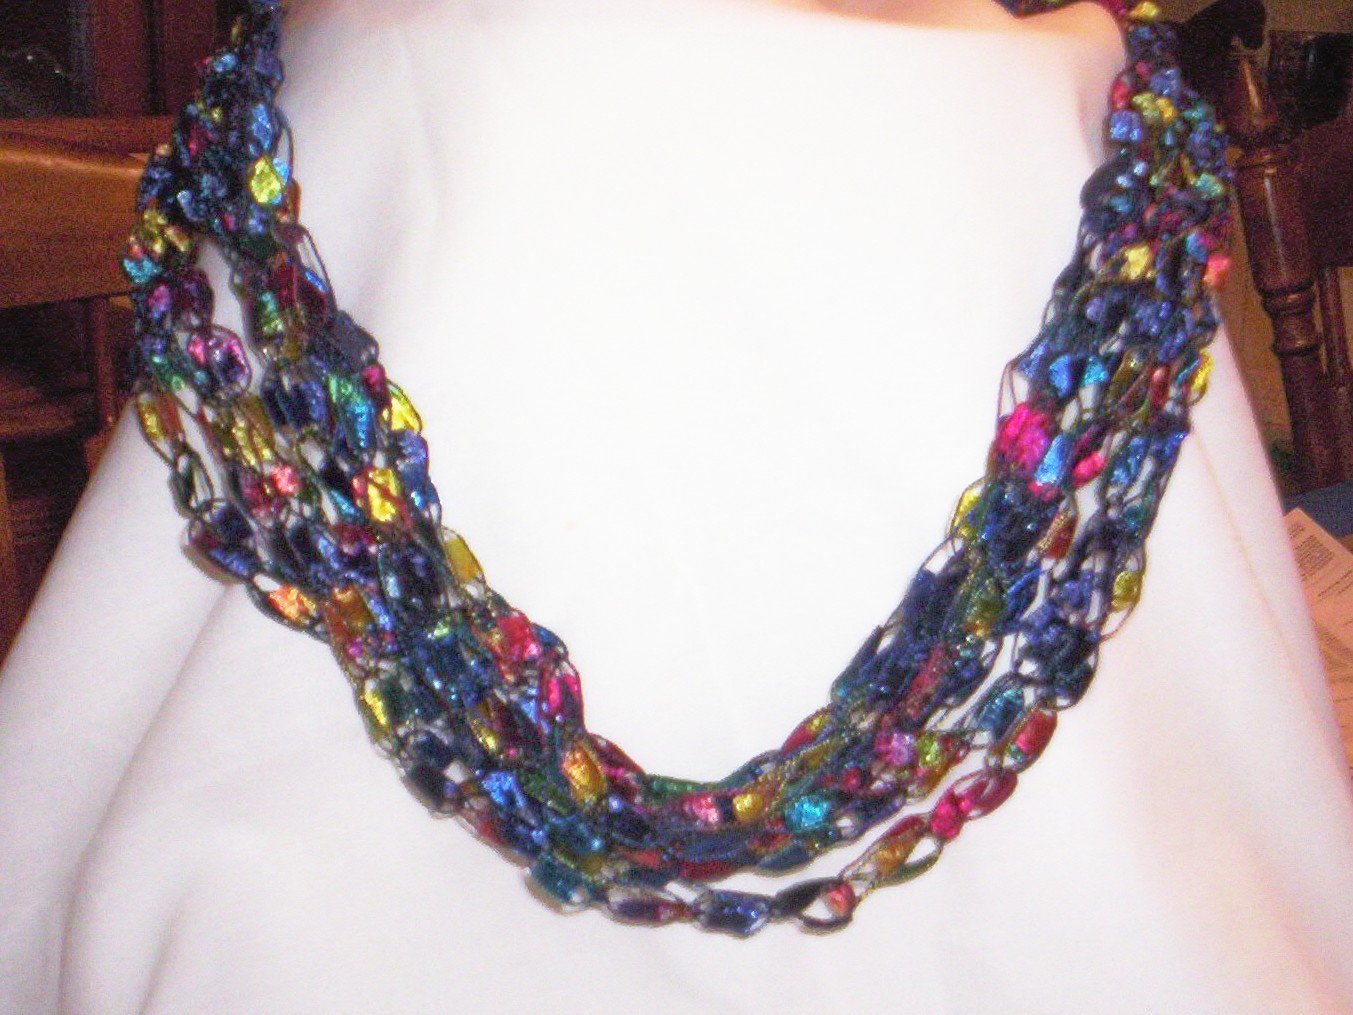 Crocheted Necklaces